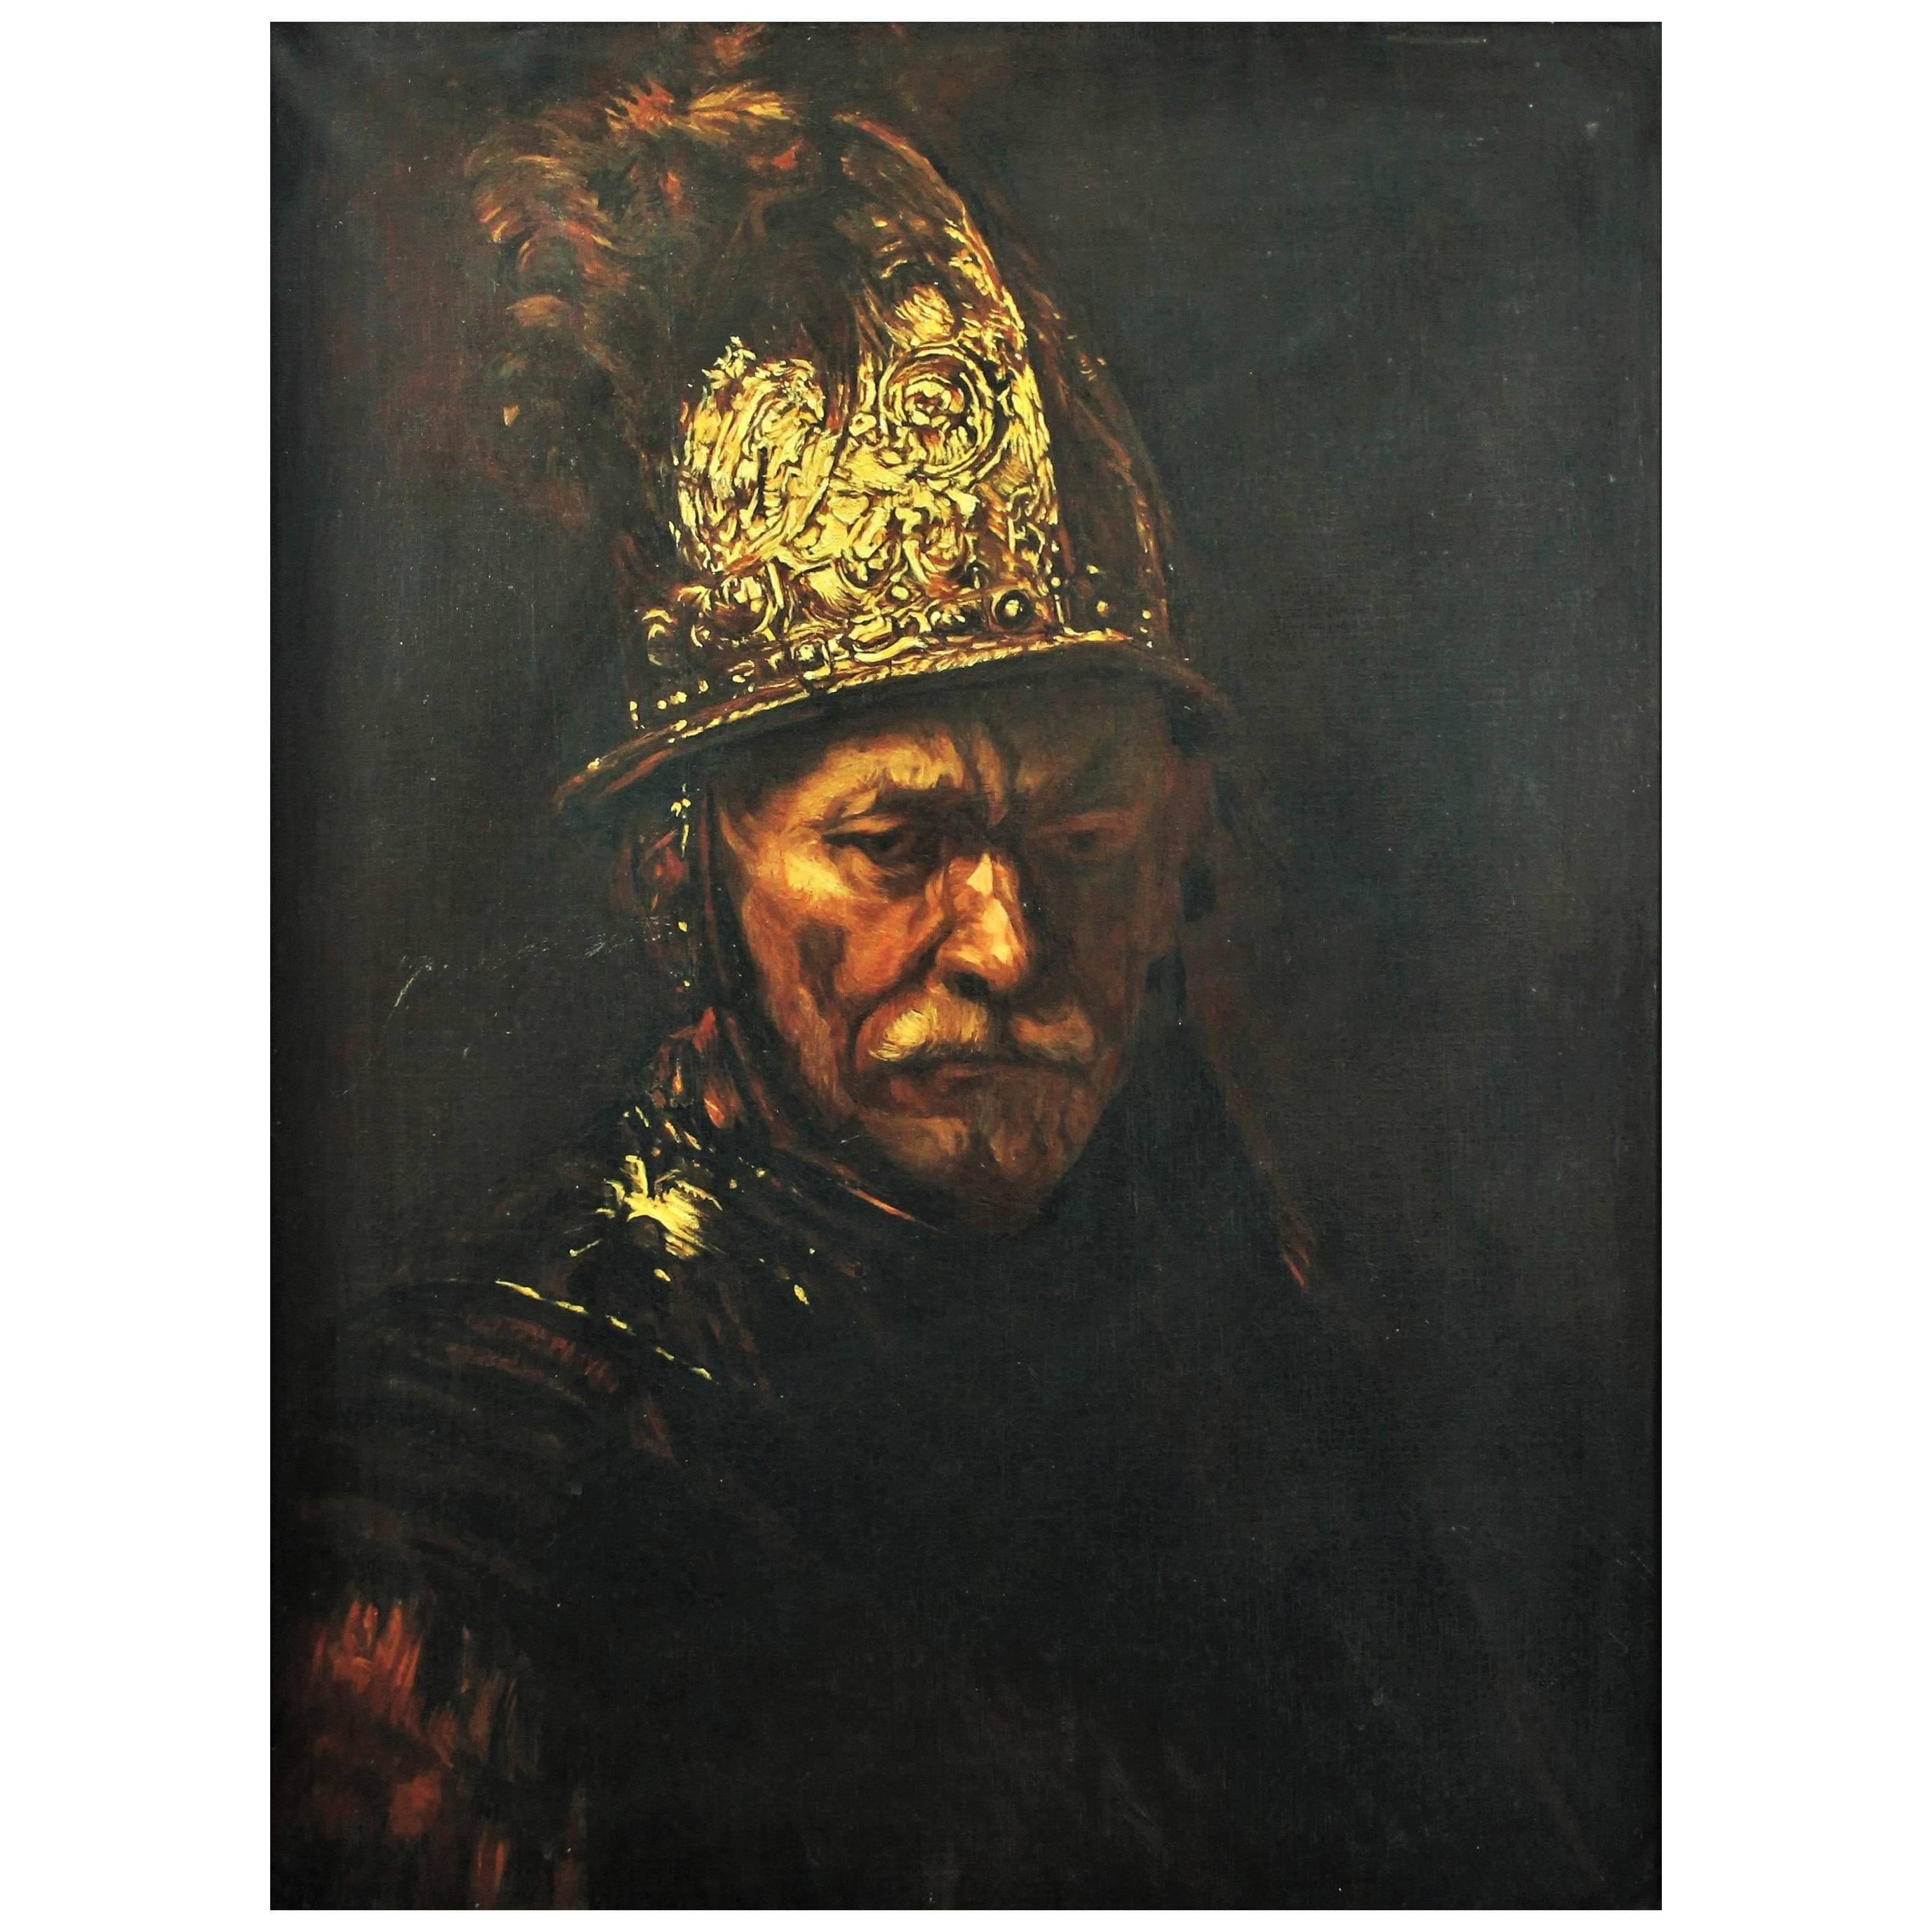 After Rembrandt "The Man with The Golden Helmet" 19th Century School